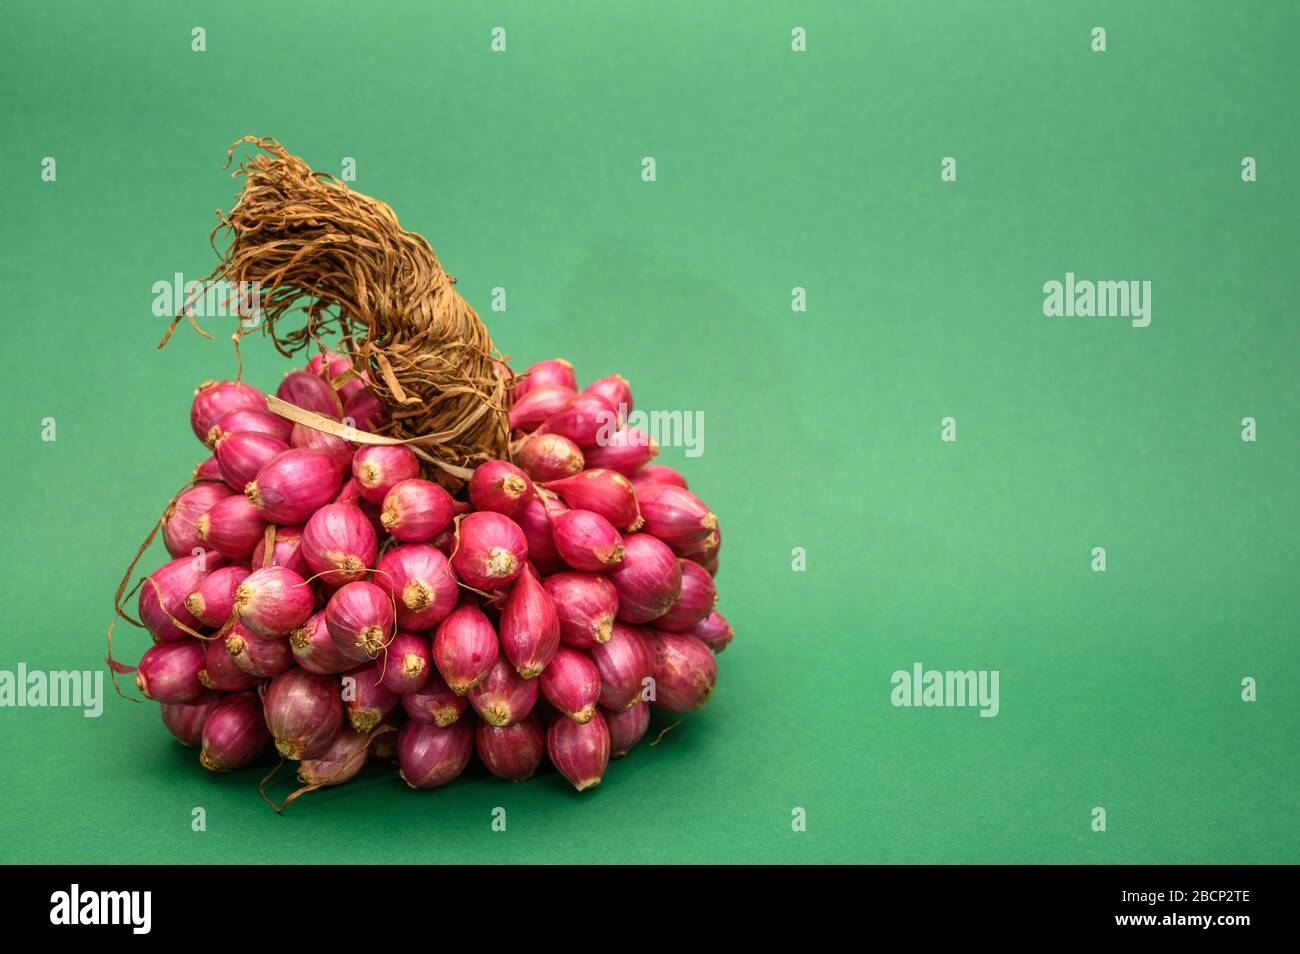 Bunch of high quality small red shallot sambar onions from India on green background Stock Photo